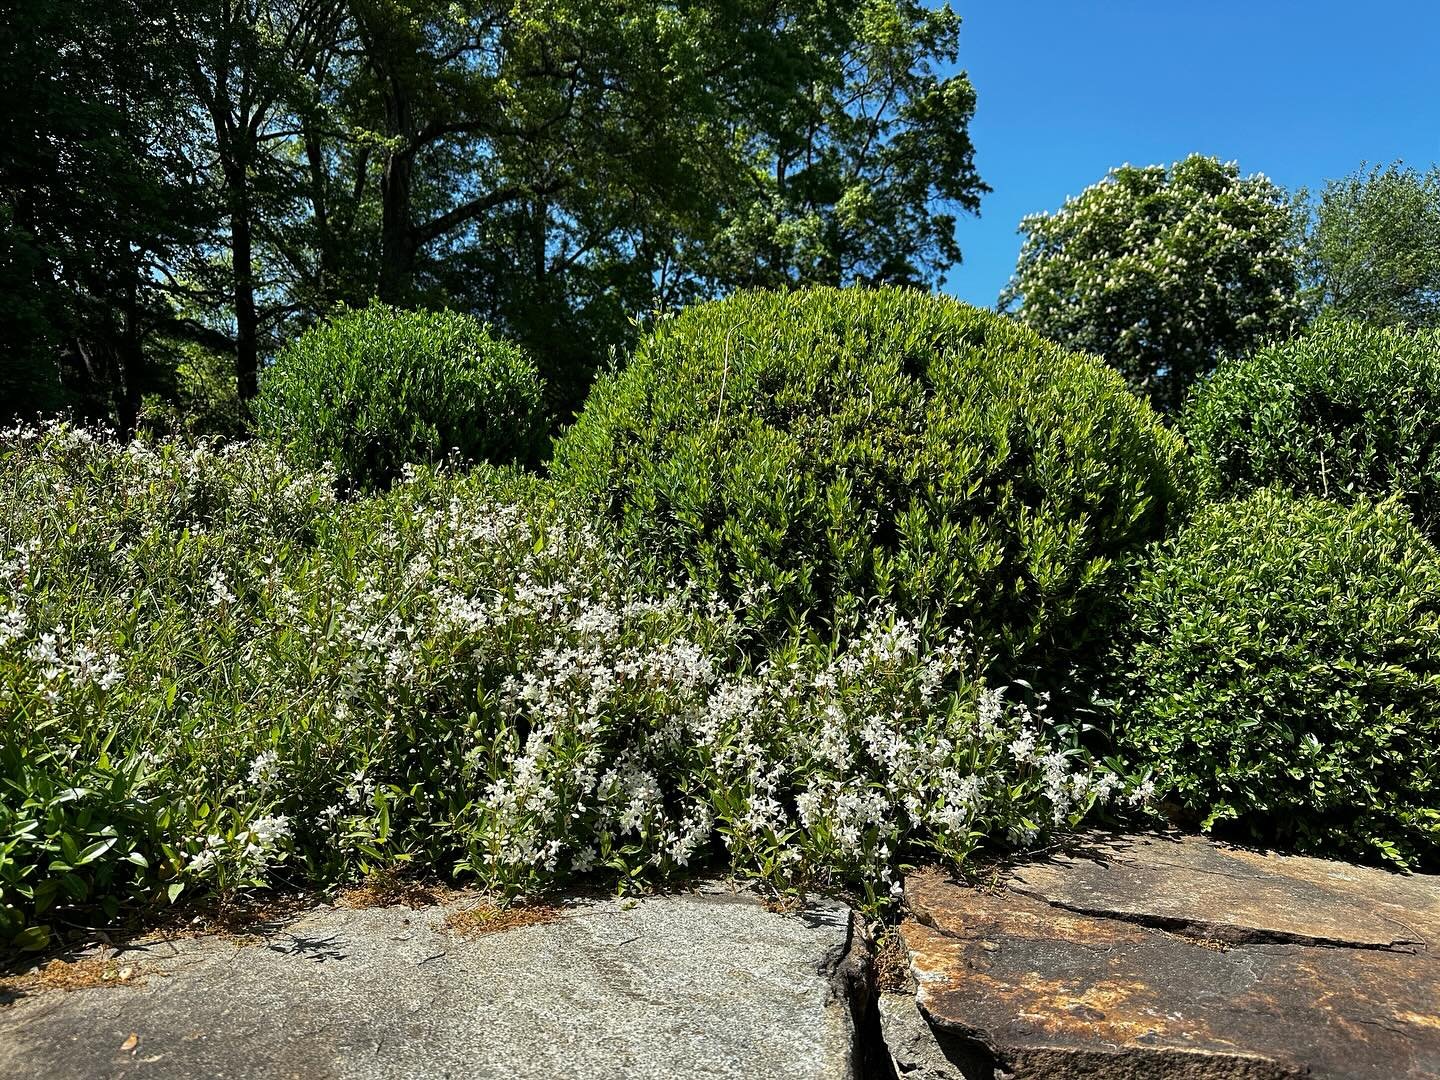 Spring is for flowers. Rock planting with mixed shrubs. 

@plantscapesct